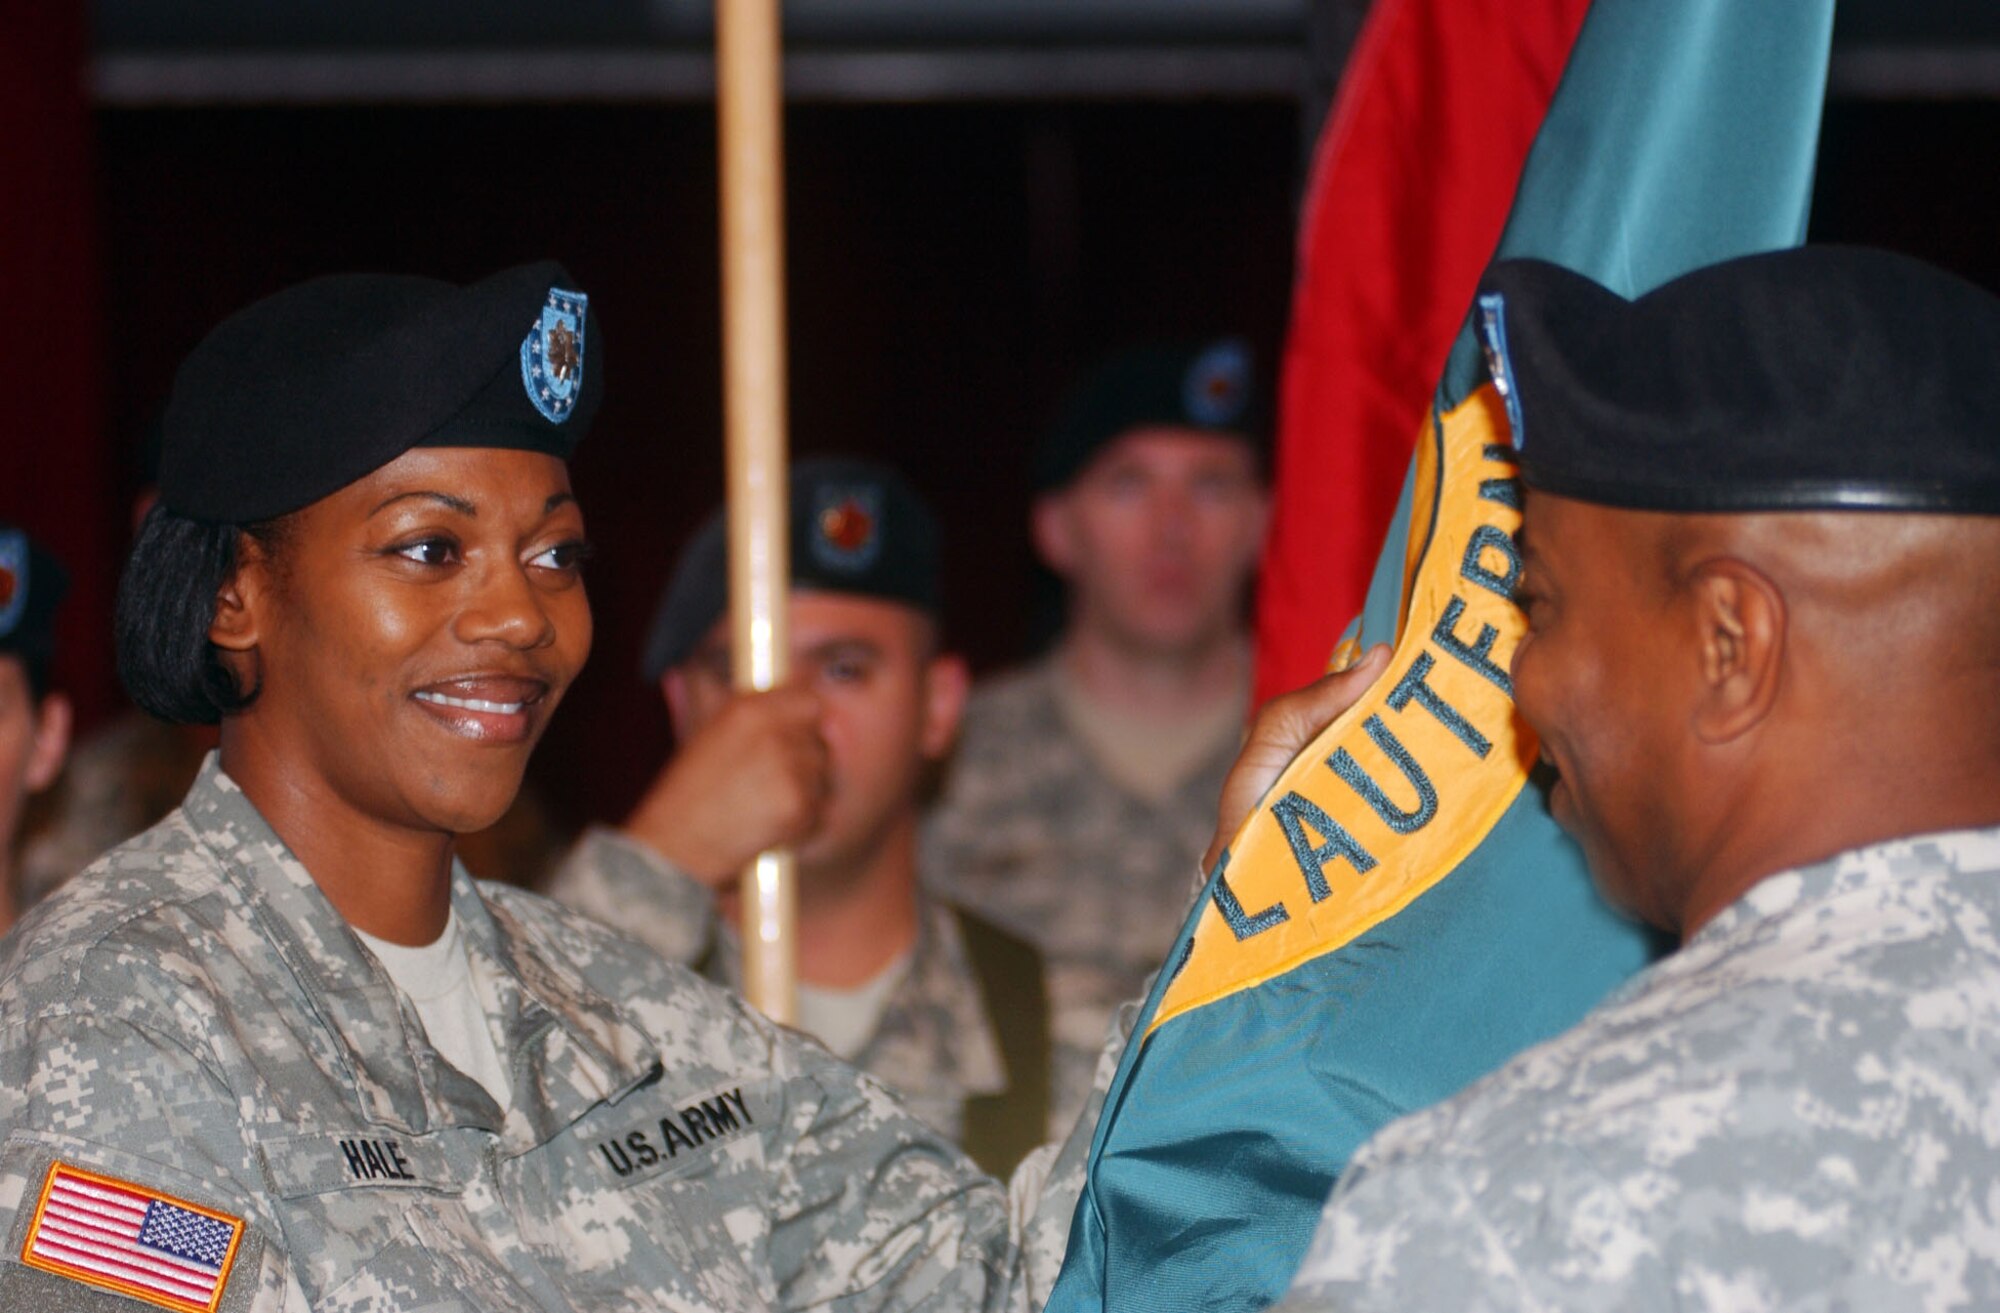 Lt. Col. Mechelle B. Hale, U.S. Army Garrison Kaiserslautern commander, accepts the Garrison Organizational Colors from Col. Willie E. Gaddis, USAG Heidelberg commander, in a change-of-command ceremony Aug. 10 at the Armstrong Community Club on Vogelweh Housing in Kaiserslautern.